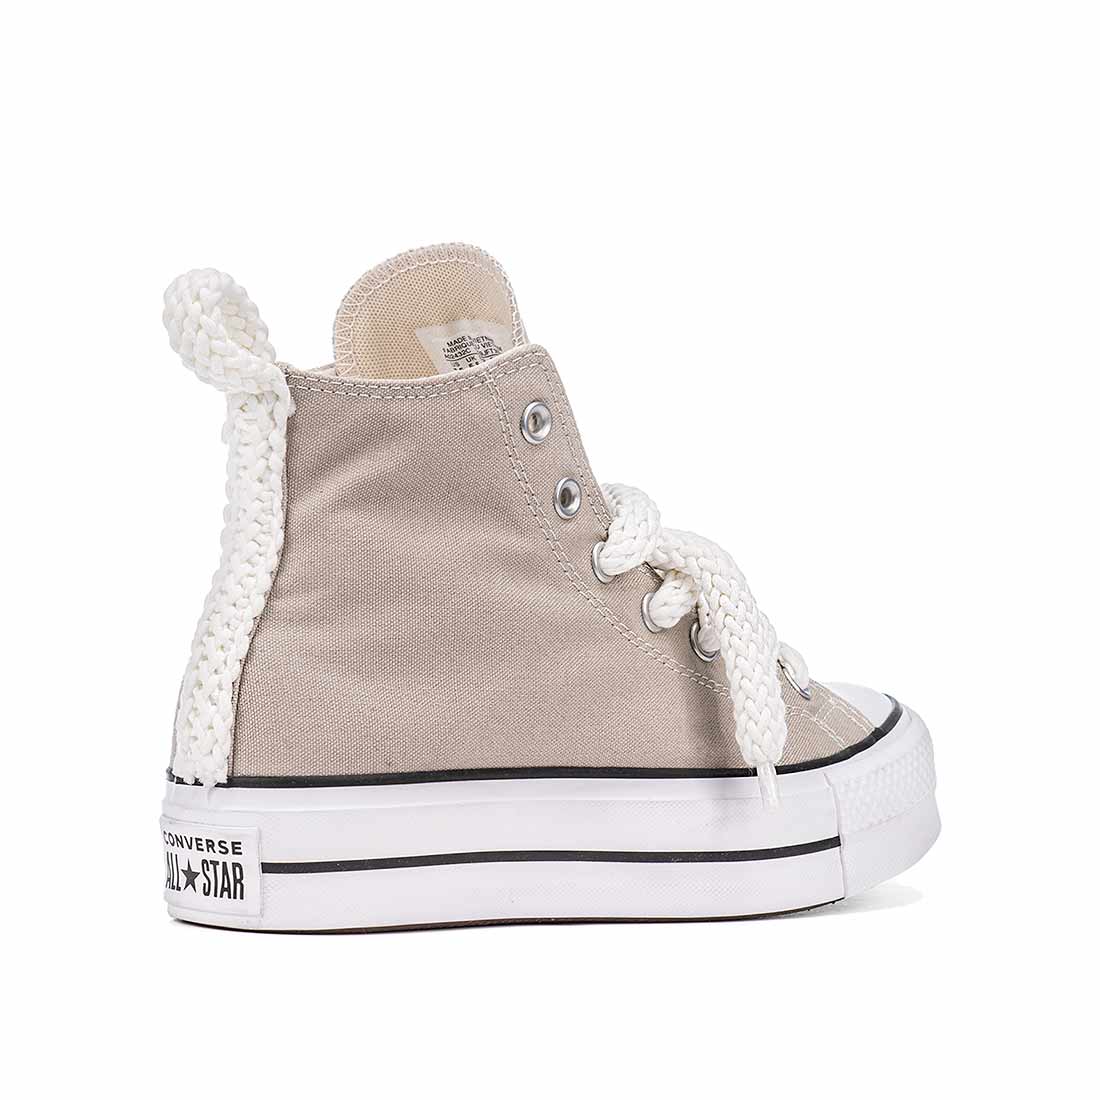 Converse all star Rope